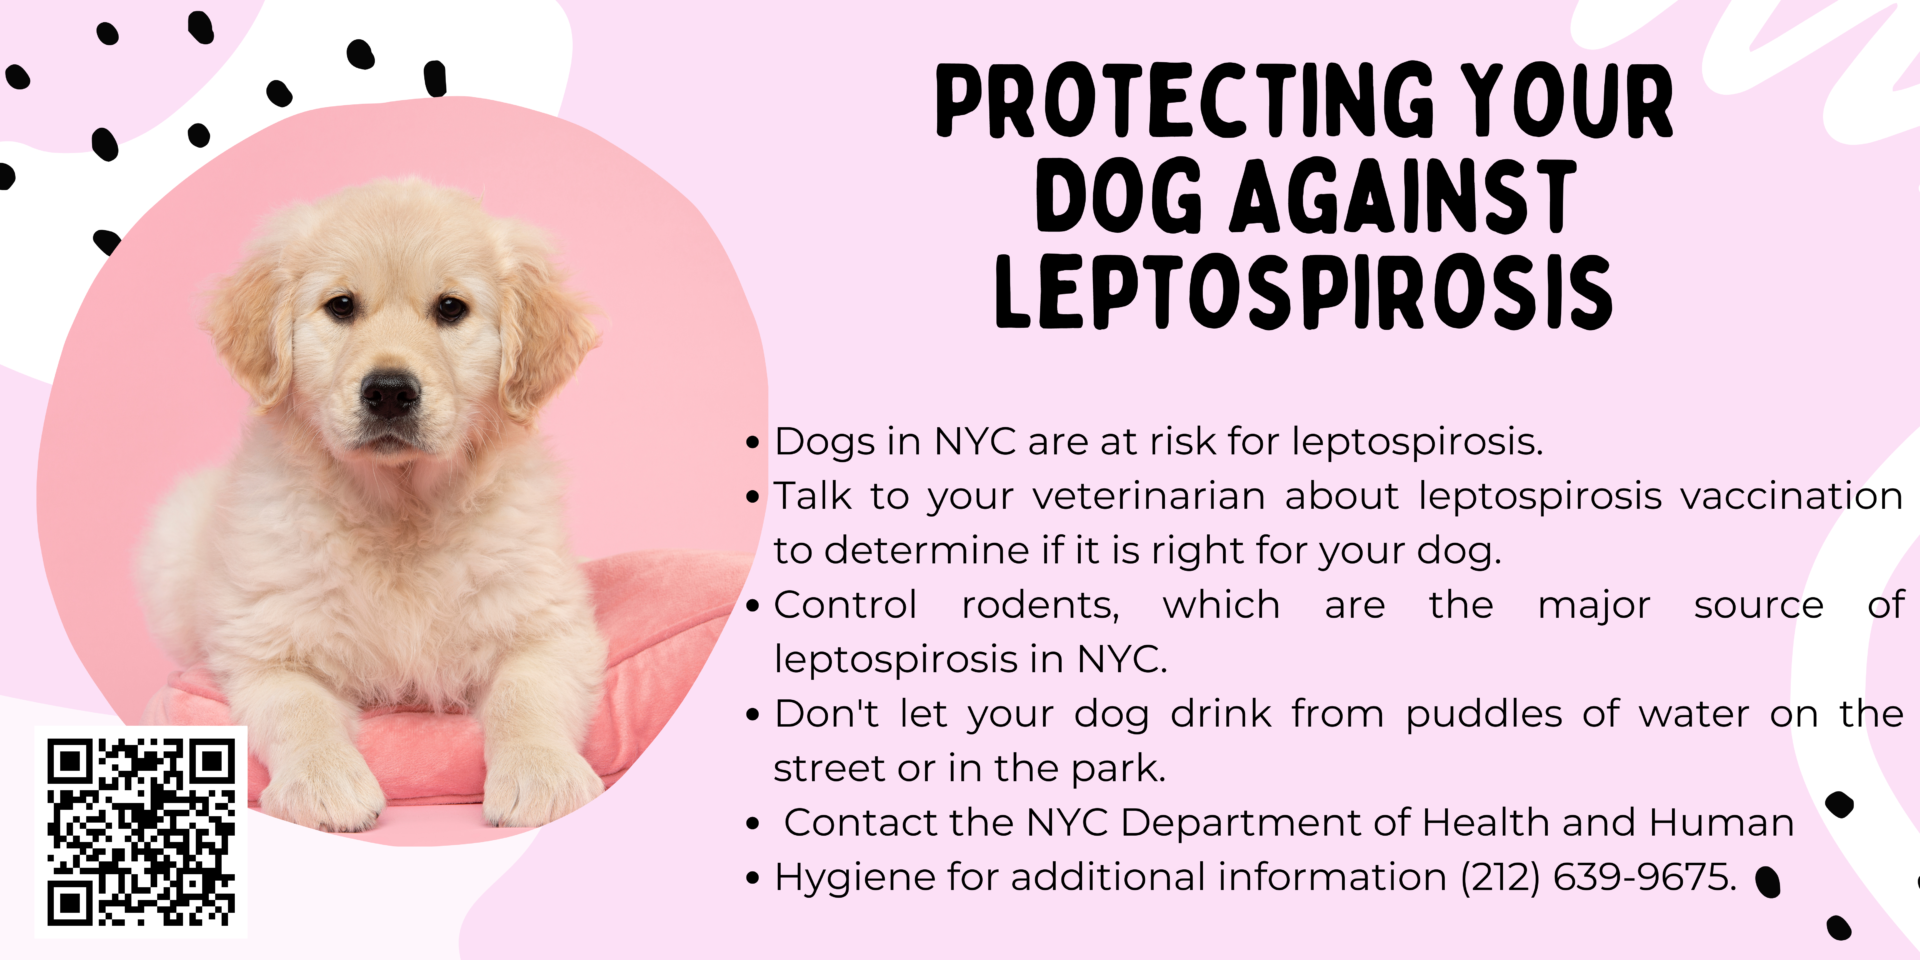 Protecting Your Dog Against Leptospirosis (2)